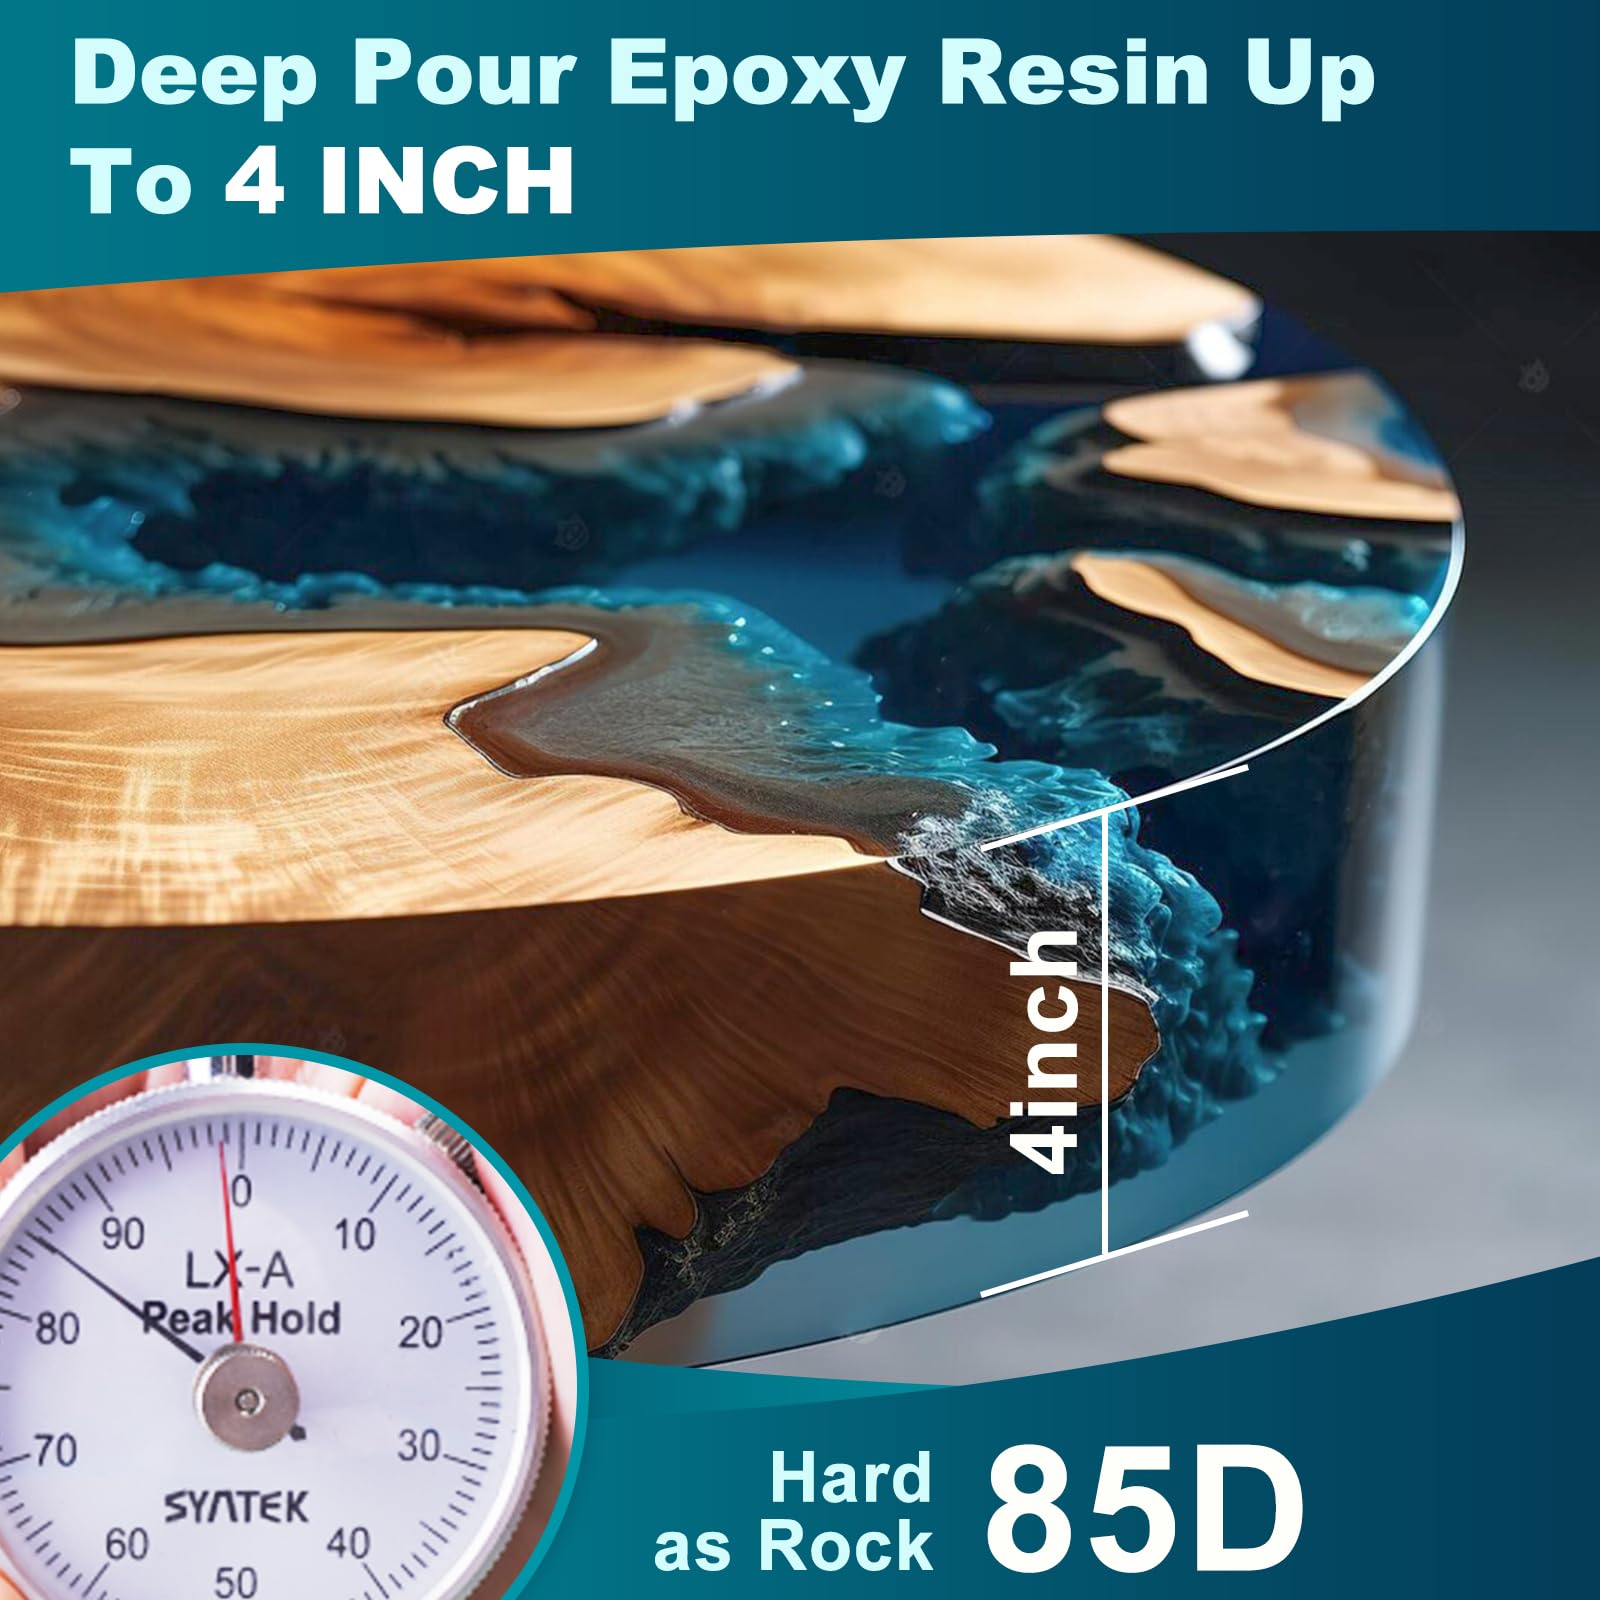 Deep pour epoxy resin up to 4 inch and 85D hardness